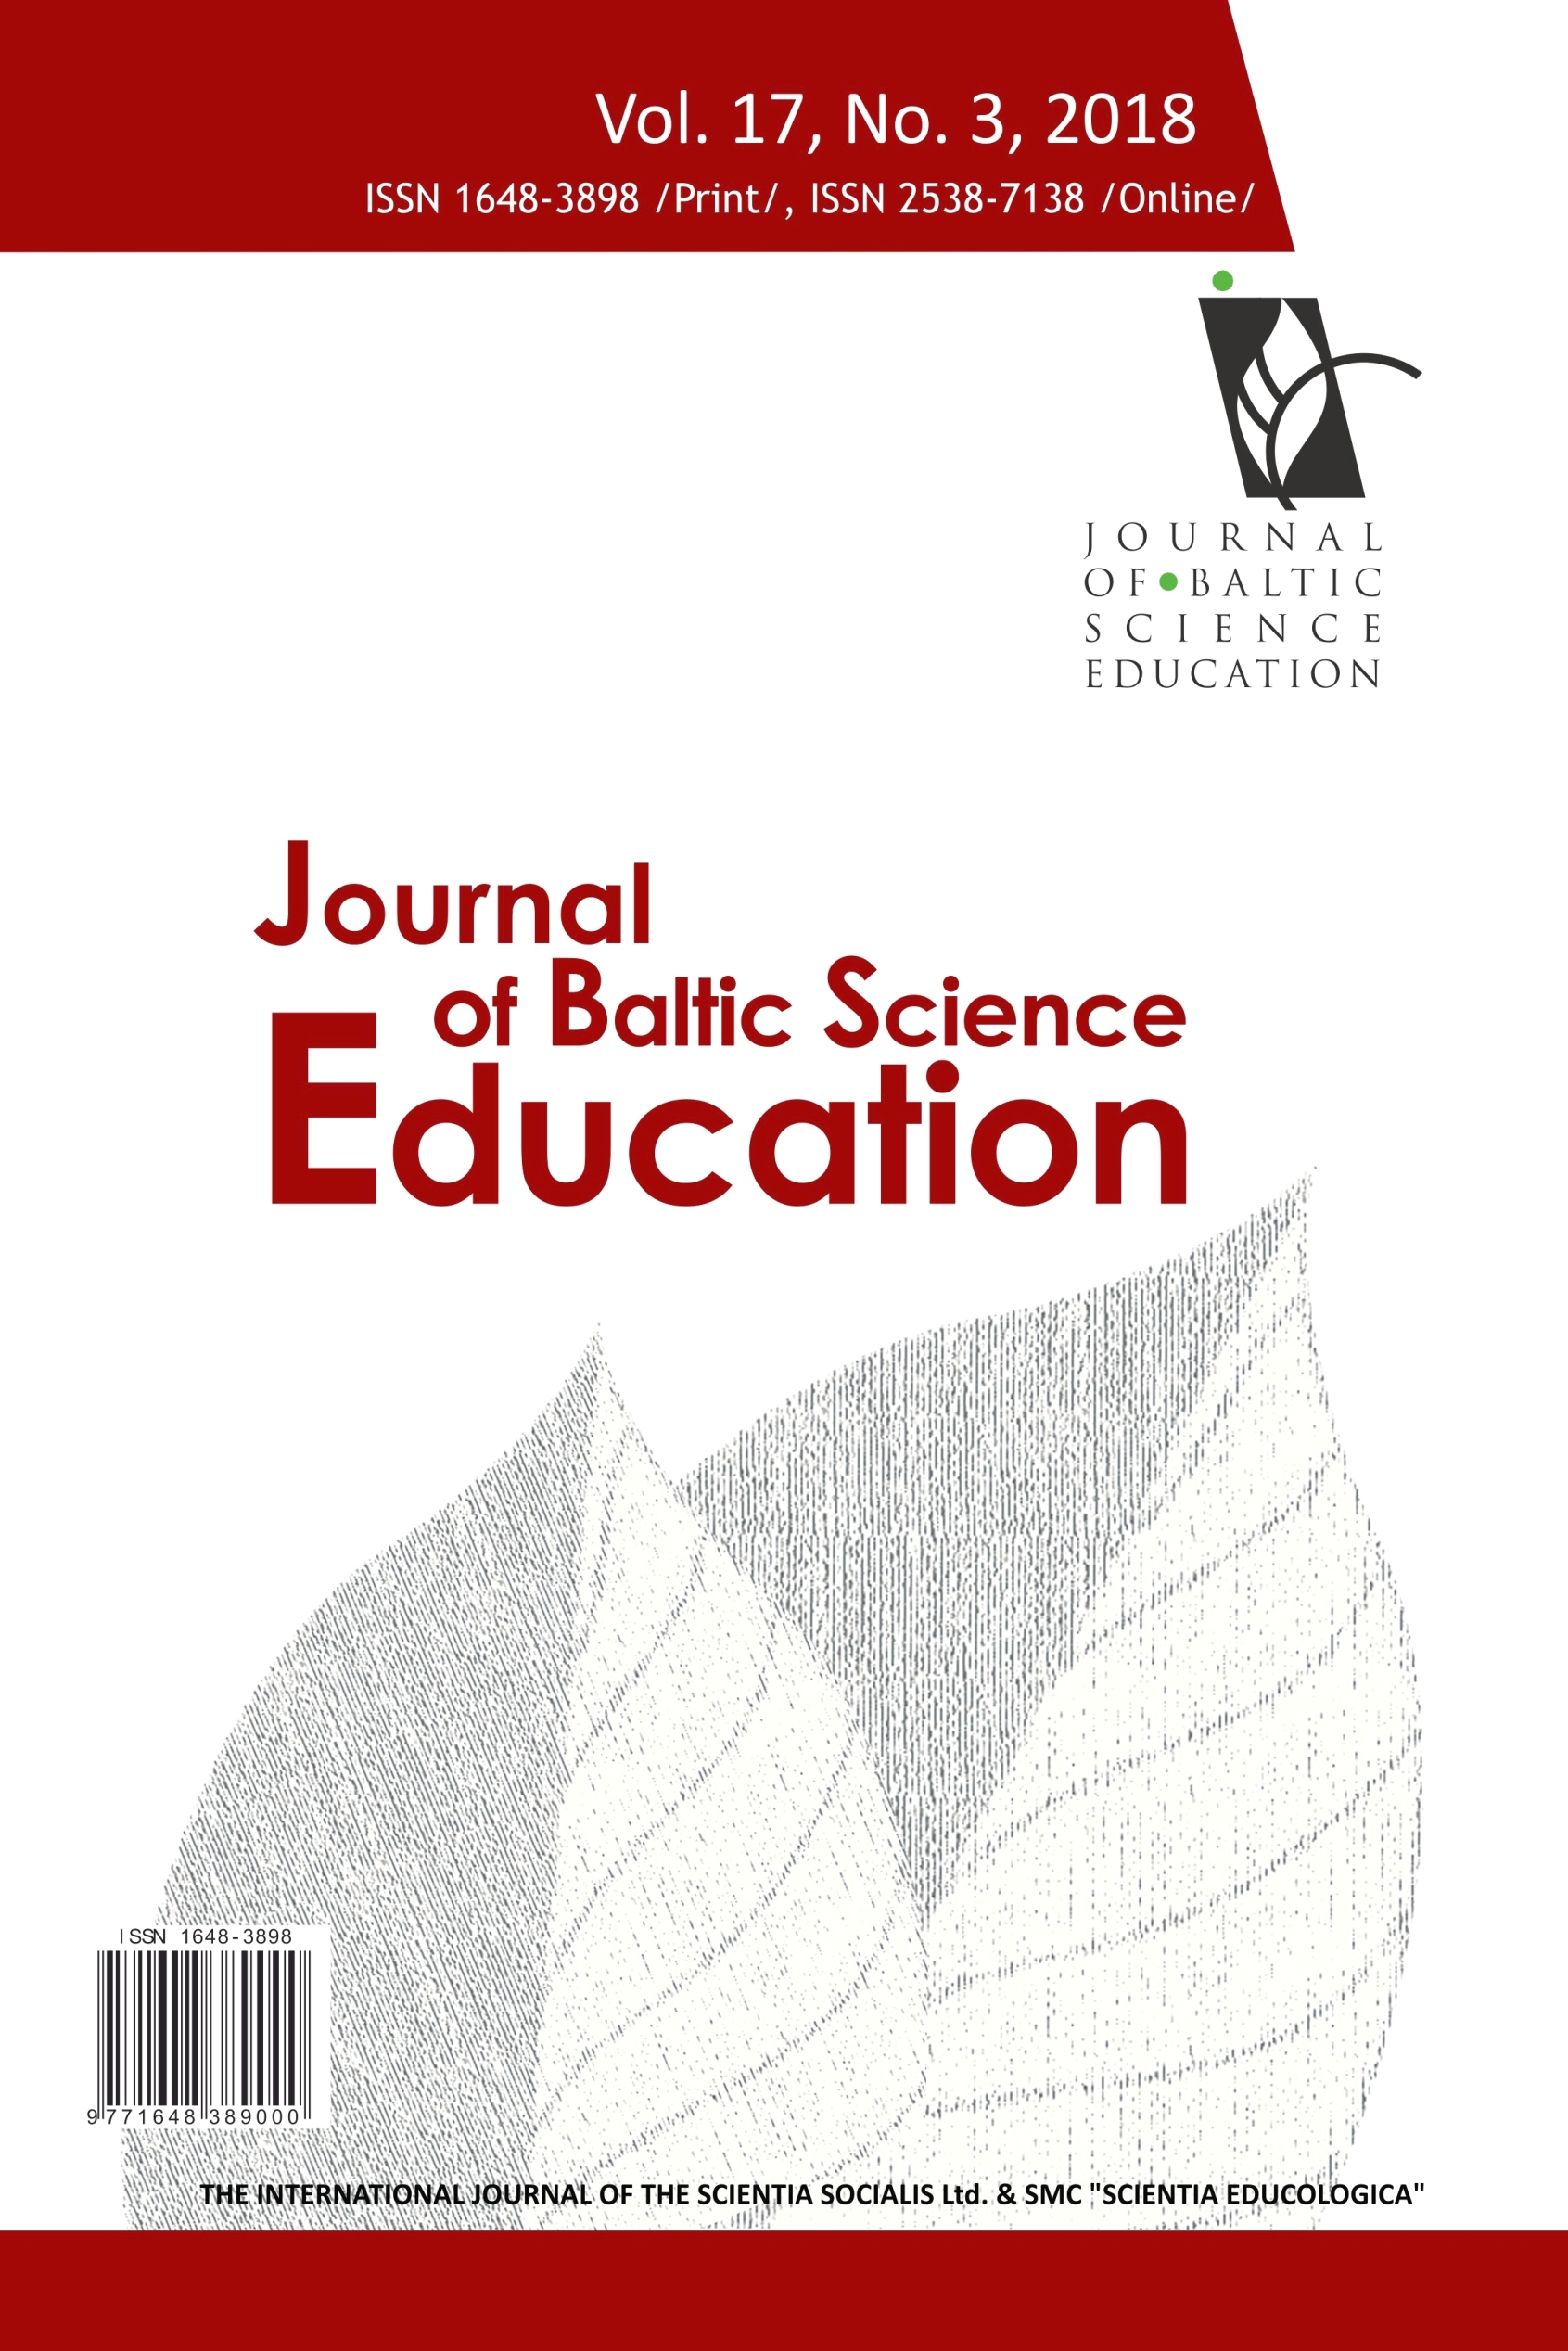 PAST, PRESENT AND FUTURE OF JOURNAL OF BALTIC SCIENCE EDUCATION Cover Image